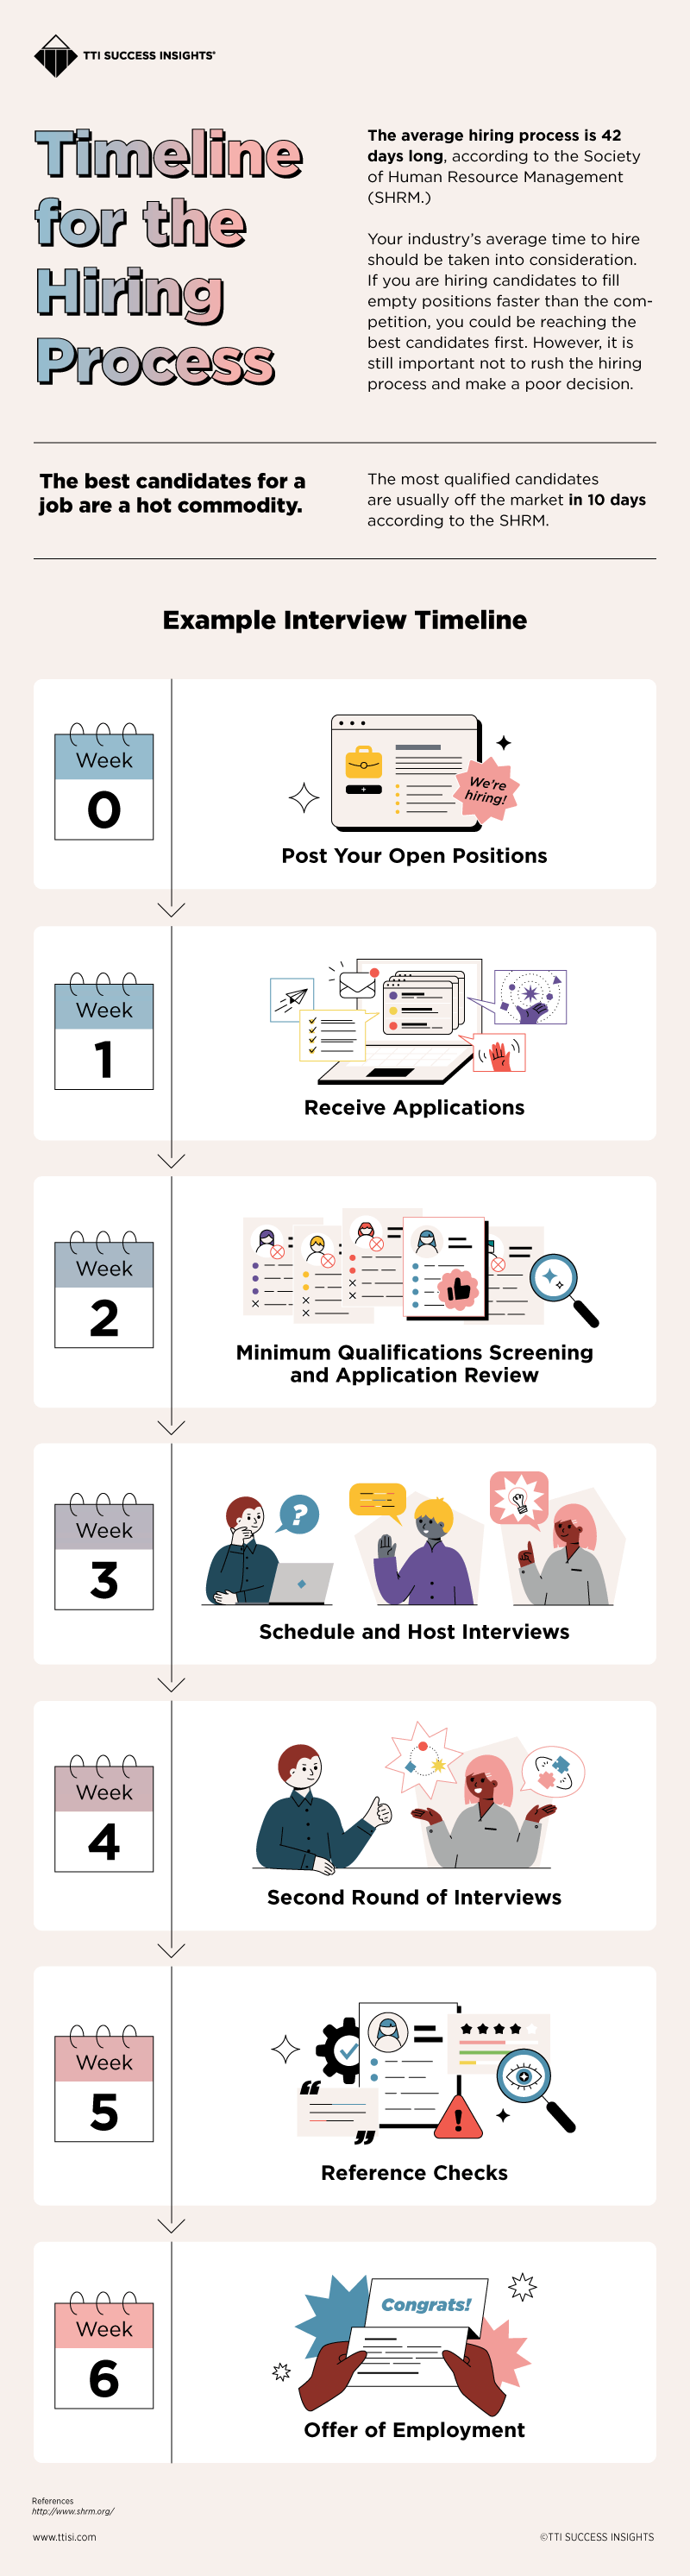 Timeline for the Hiring Process - Infographic